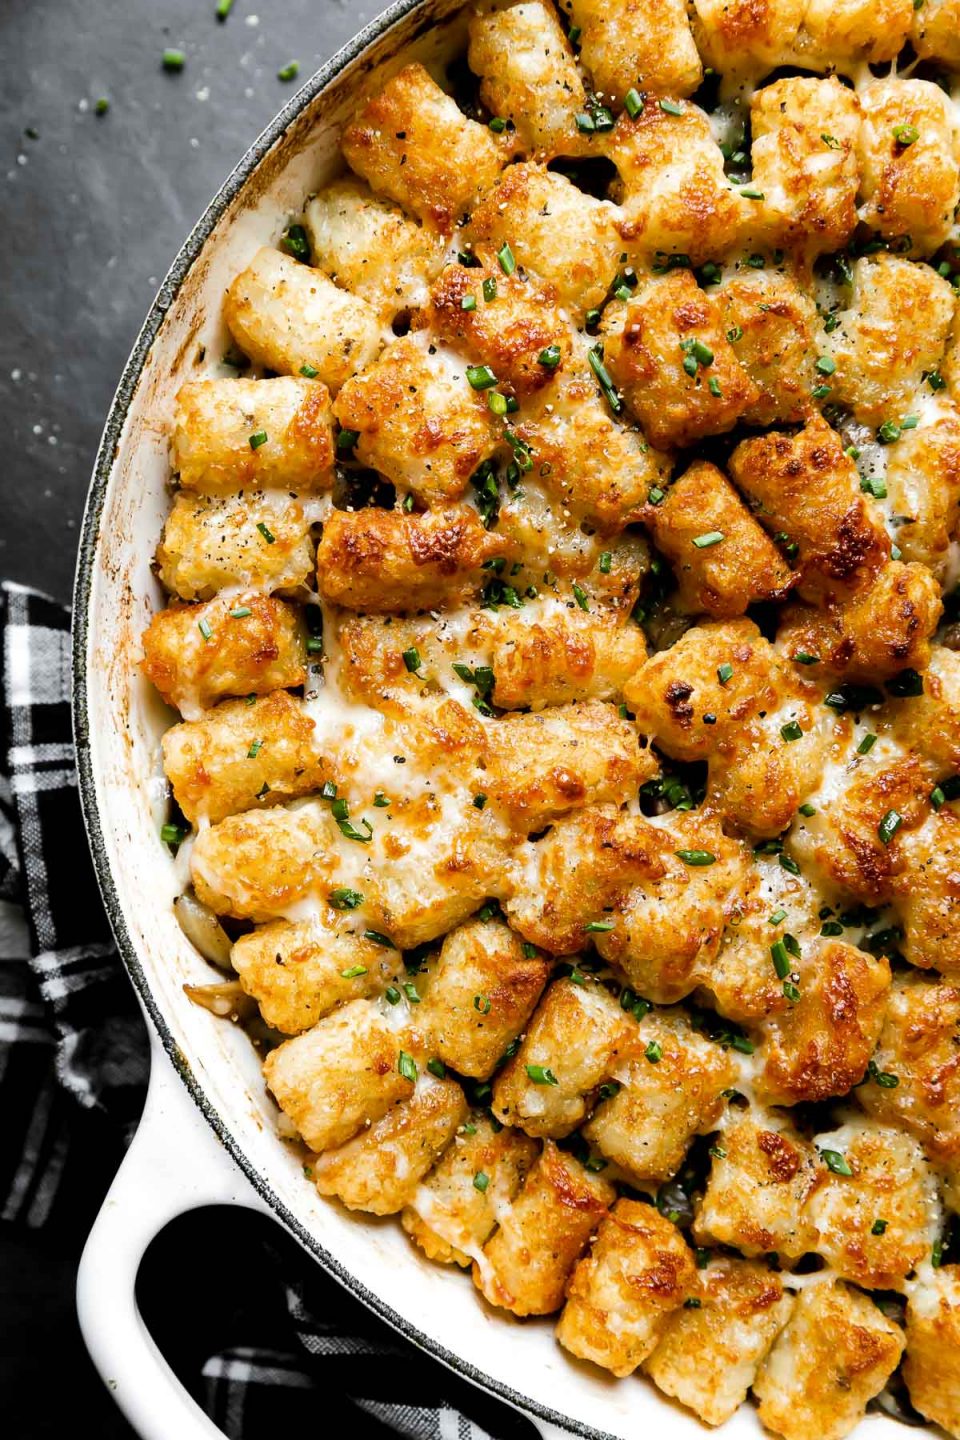 A finished Truffled Steak Tater Tot Hotdish made in a white heavy-bottomed pan sits atop a dark textured surface. A black and white plaid linen napkin rests alongside the pan and the hotdish has been garnished with freshly chopped herbs.